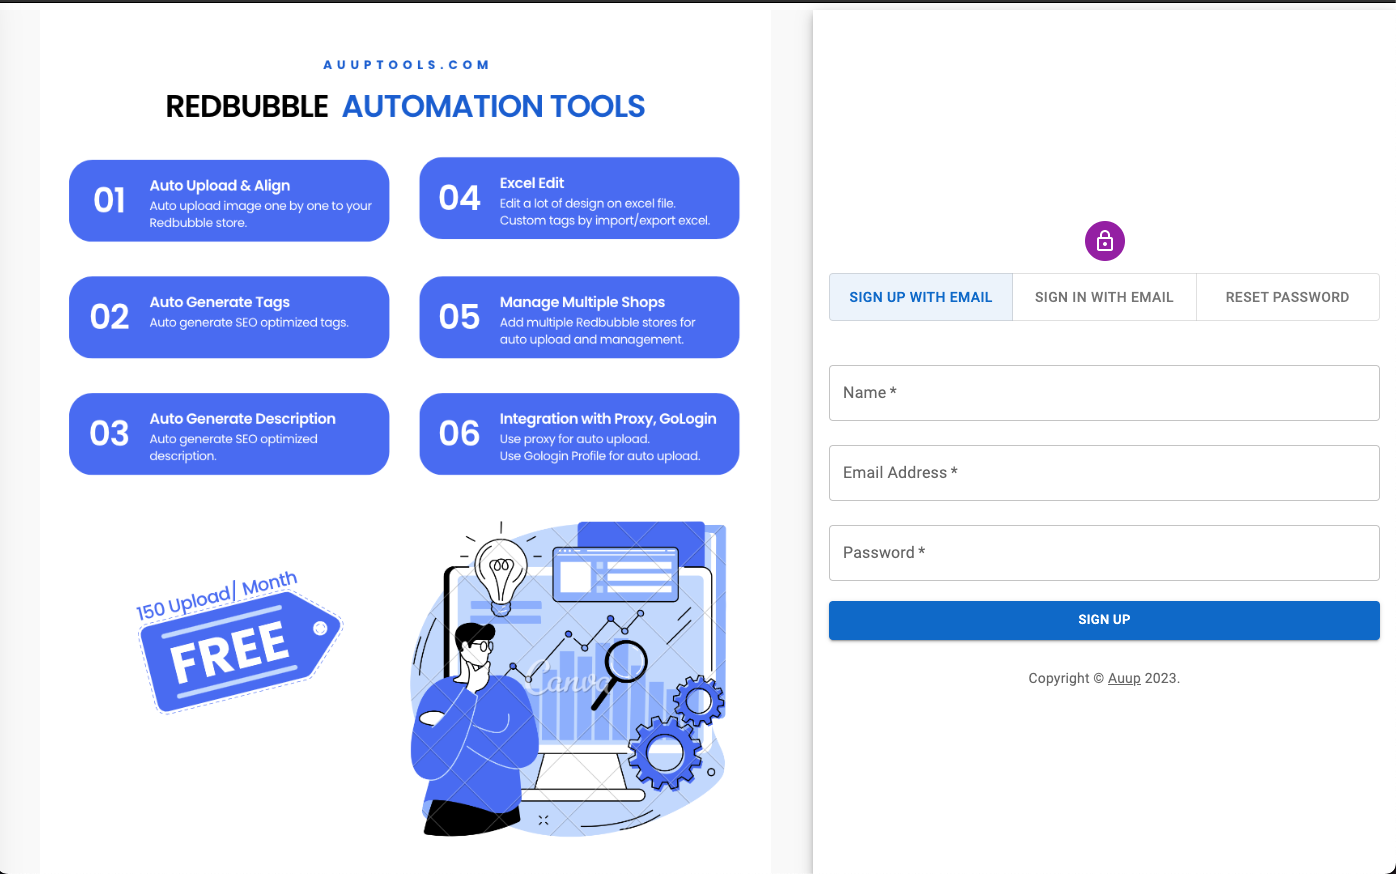 Sign to Redbubble Automation Tools